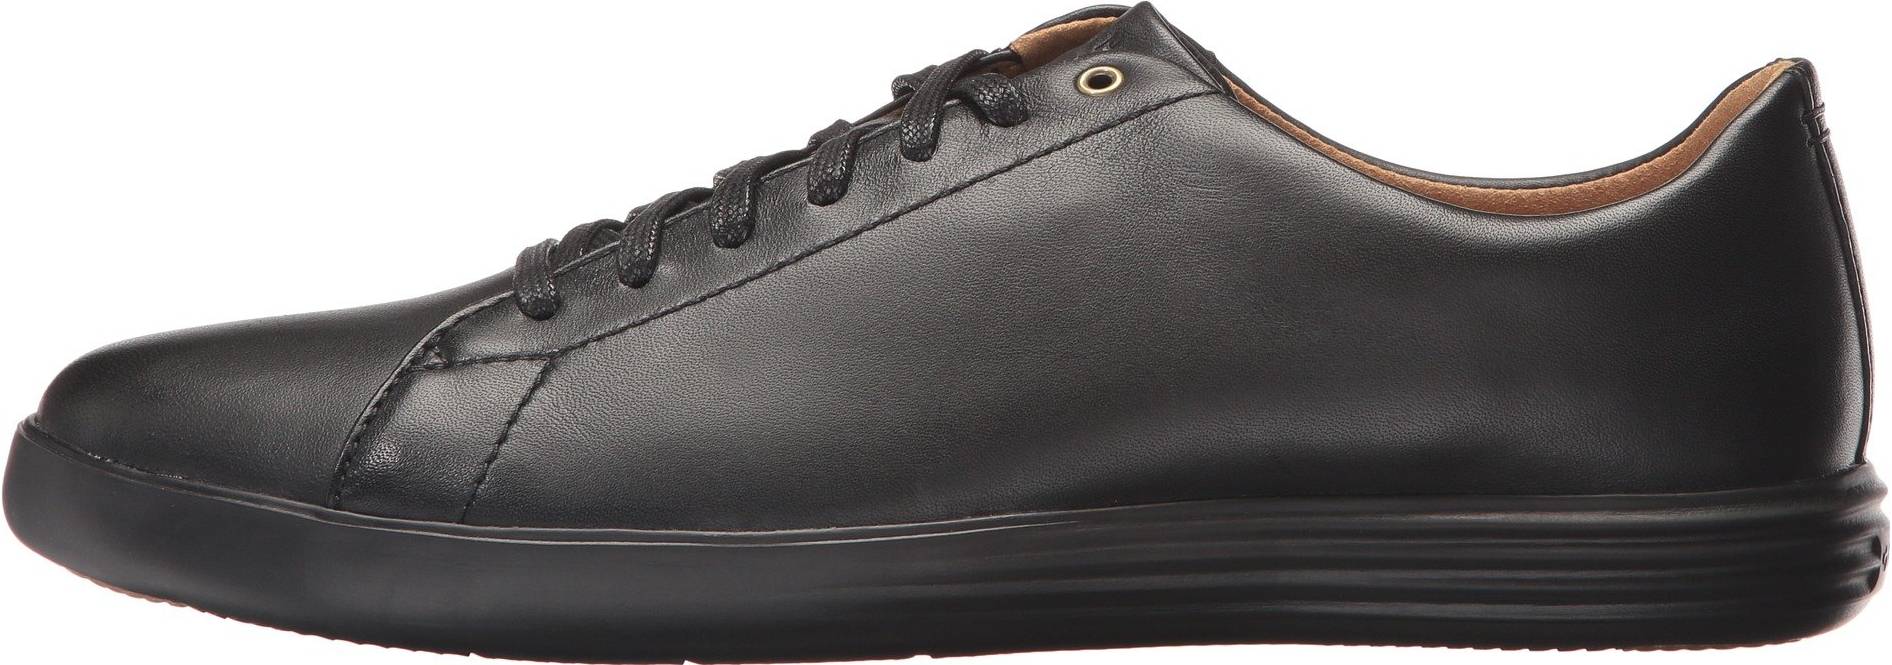 Cole Haan Grand Crosscourt Sneaker sneakers in 5 colors (only $45 